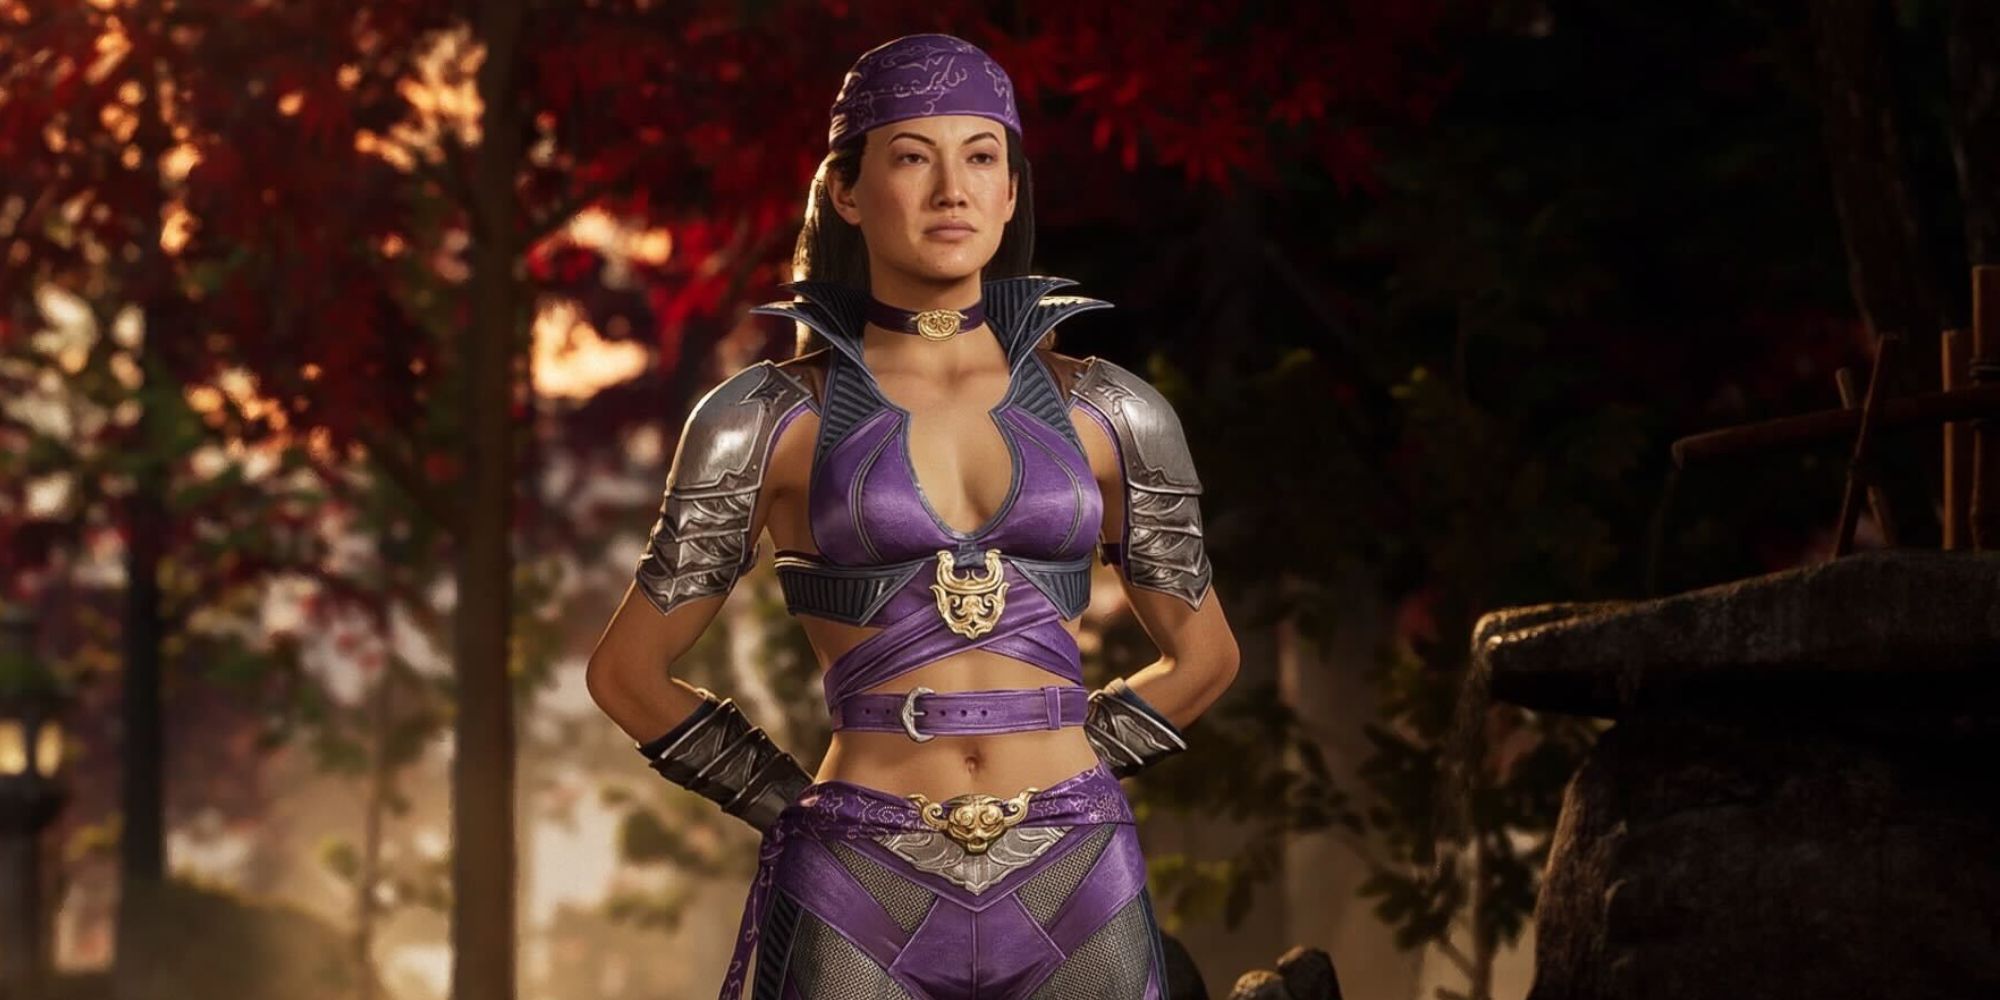 Li Mei's new skin in Mortal Kombat 11. It's purple and more revealing, but also gives her light shoulder armour